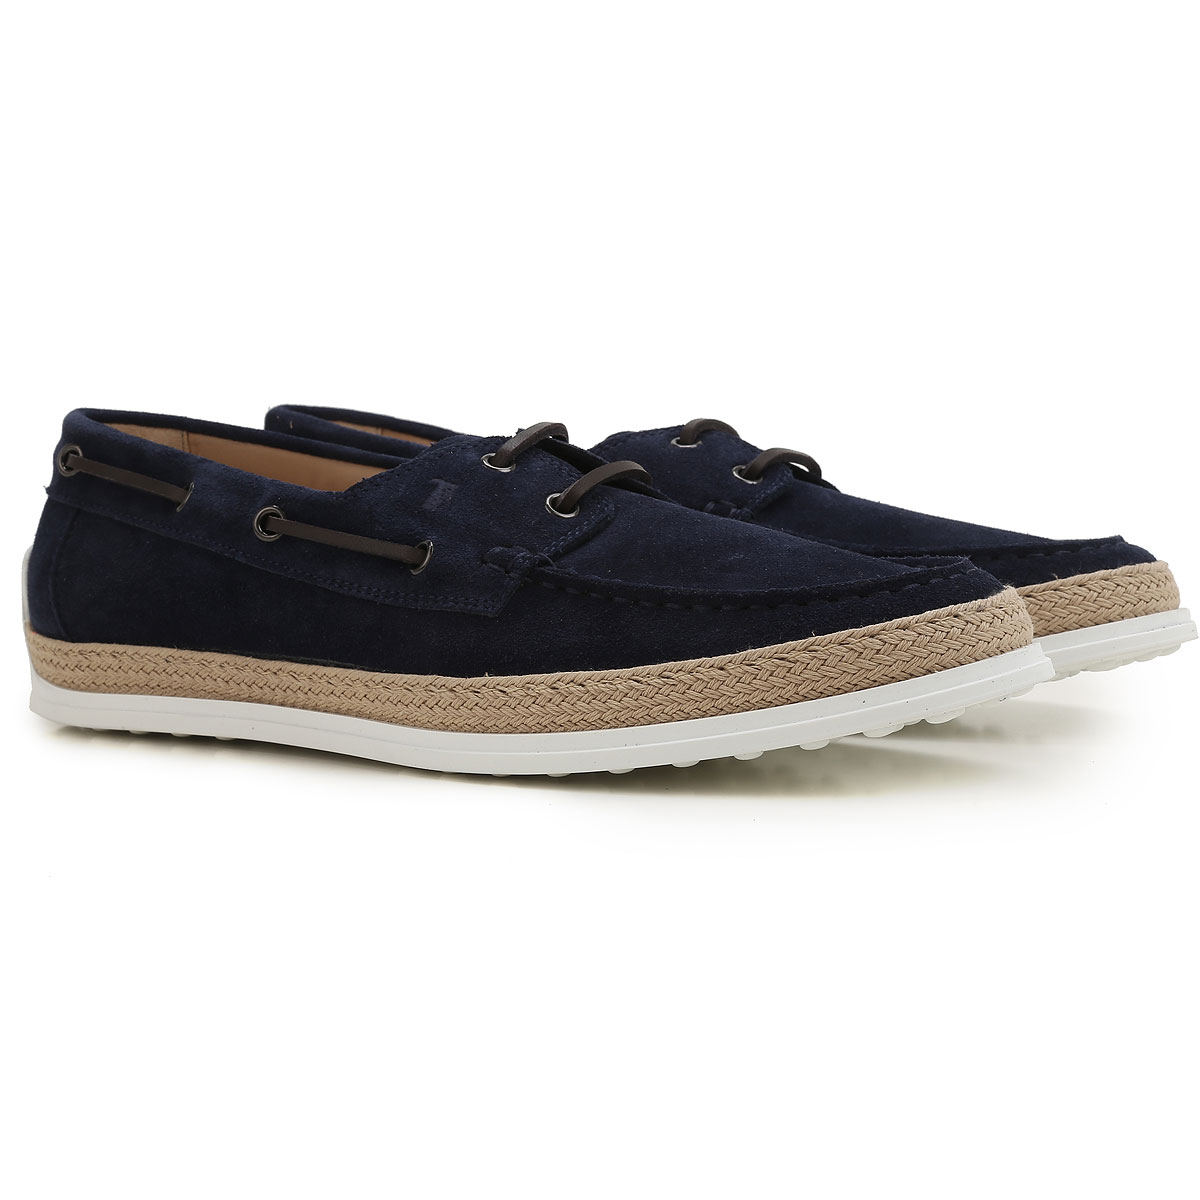 Tod's Chaussure Bateau Homme, Chaussures Dockside Outlet, Bleu marine, Daim, 2017, 40 41 41.5